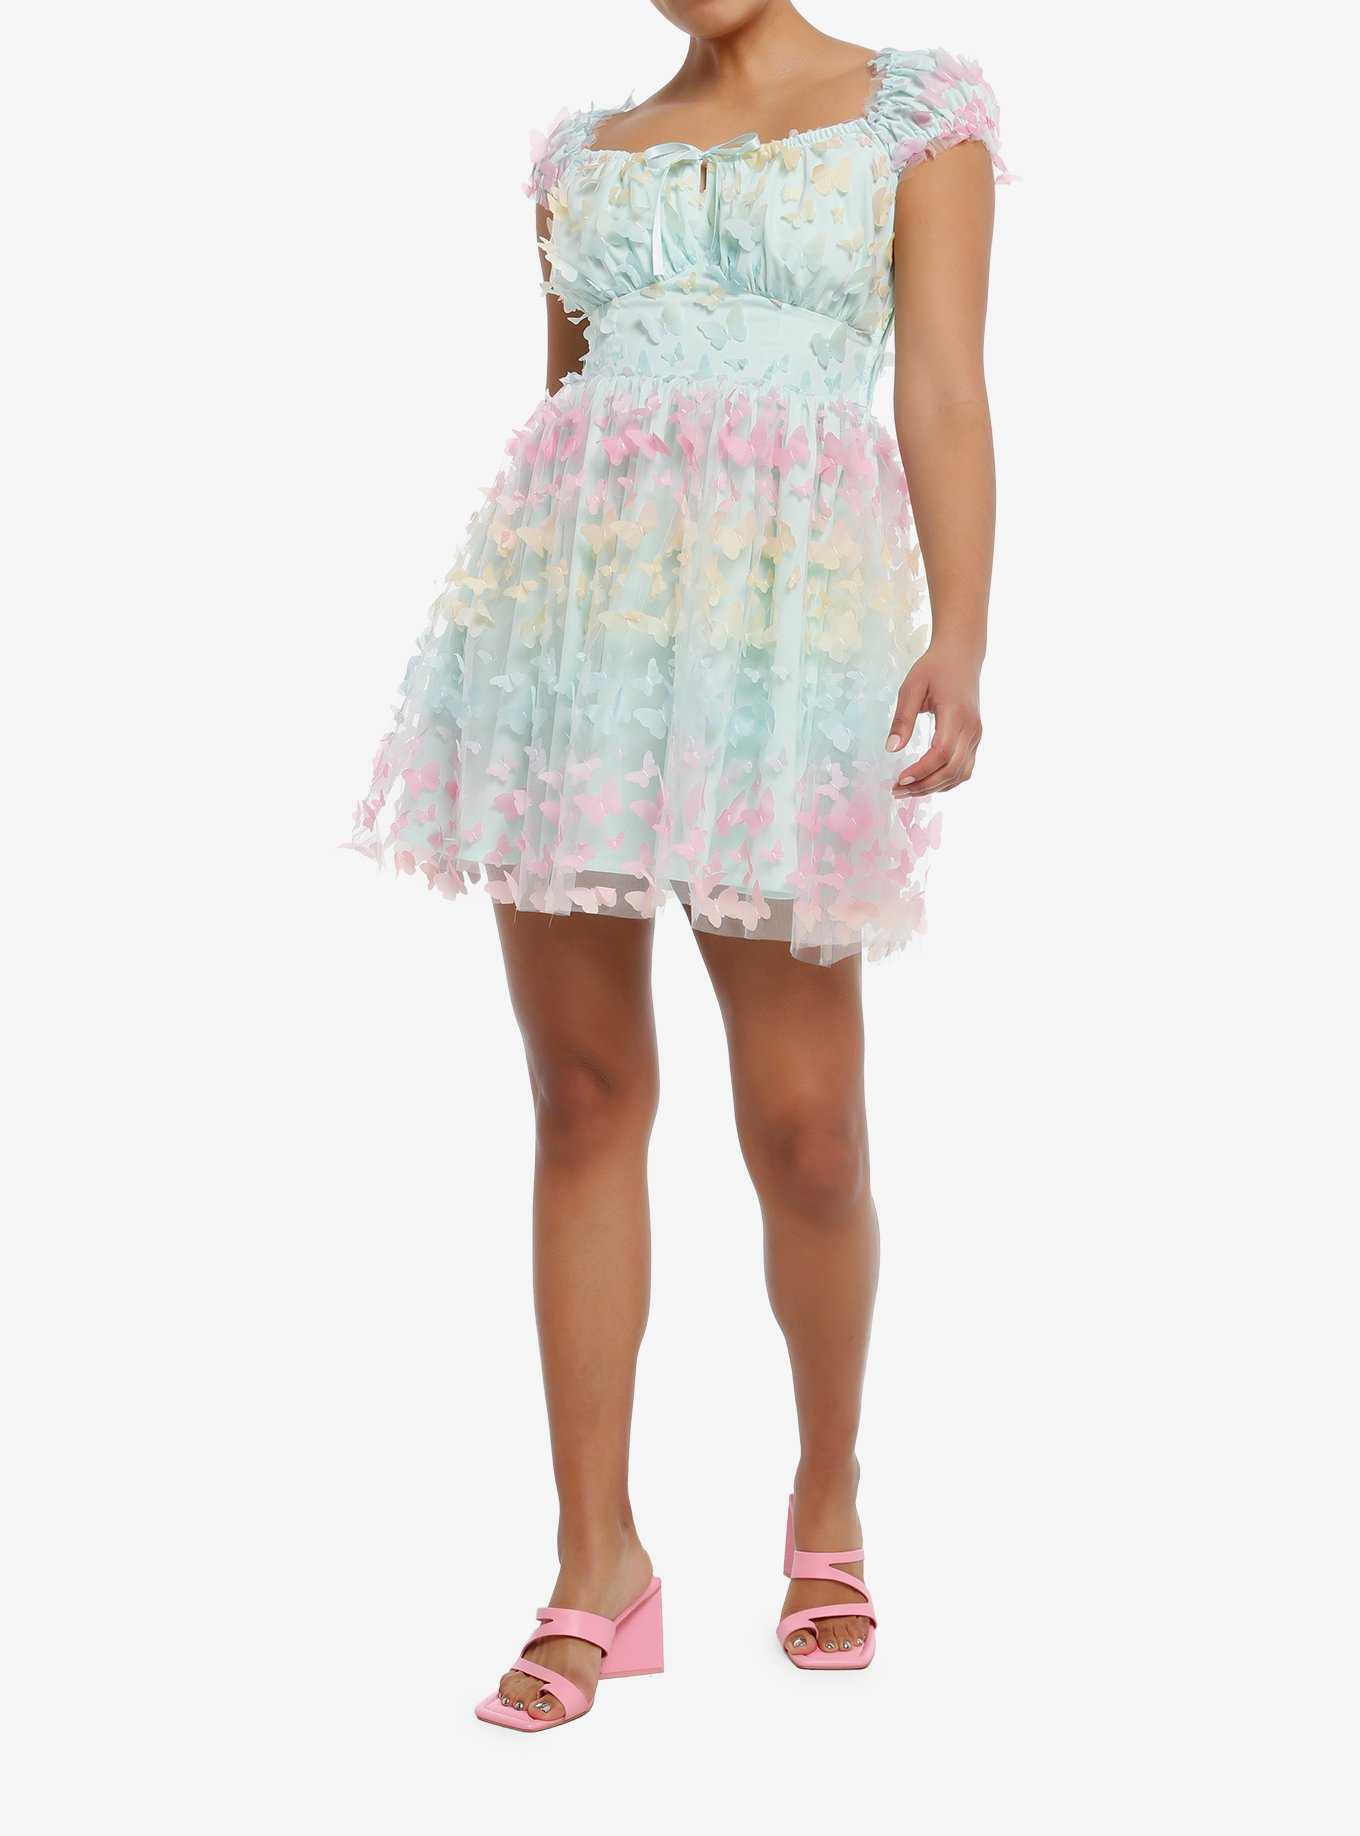 Thorn & Fable® Pastel Rainbow Butterfly Dress, , hi-res